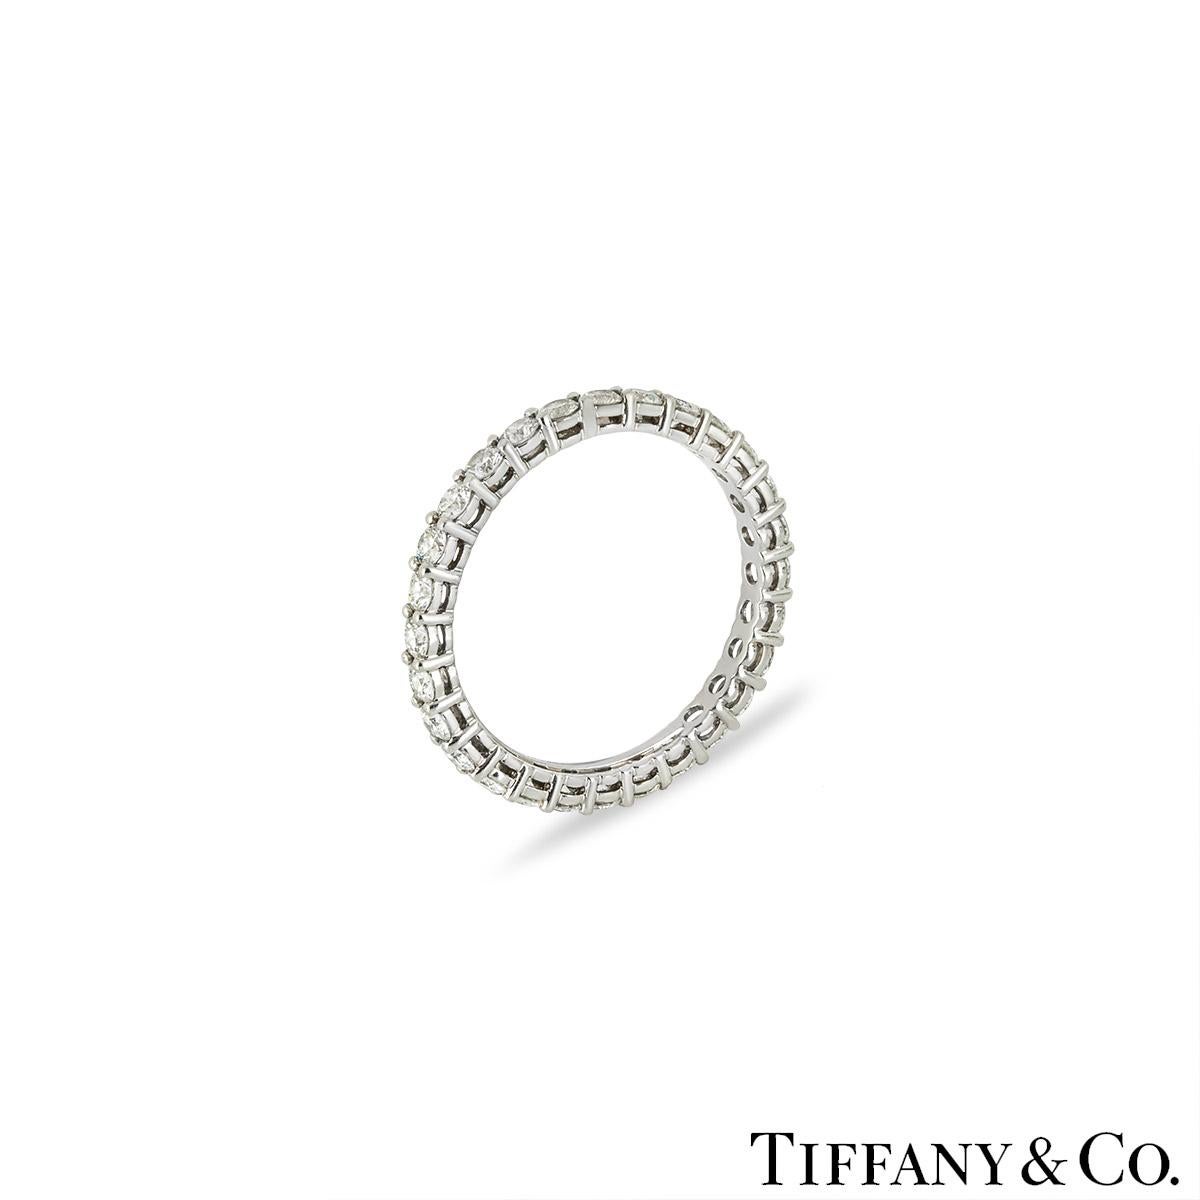 A sparkly platinum diamond full eternity ring by Tiffany & Co. from the Tiffany Forever collection. The wedding band is pave set with 28 round brilliant cut diamonds with an approximate total weight of 0.85ct, F-G colour and VS clarity. The 2.14mm